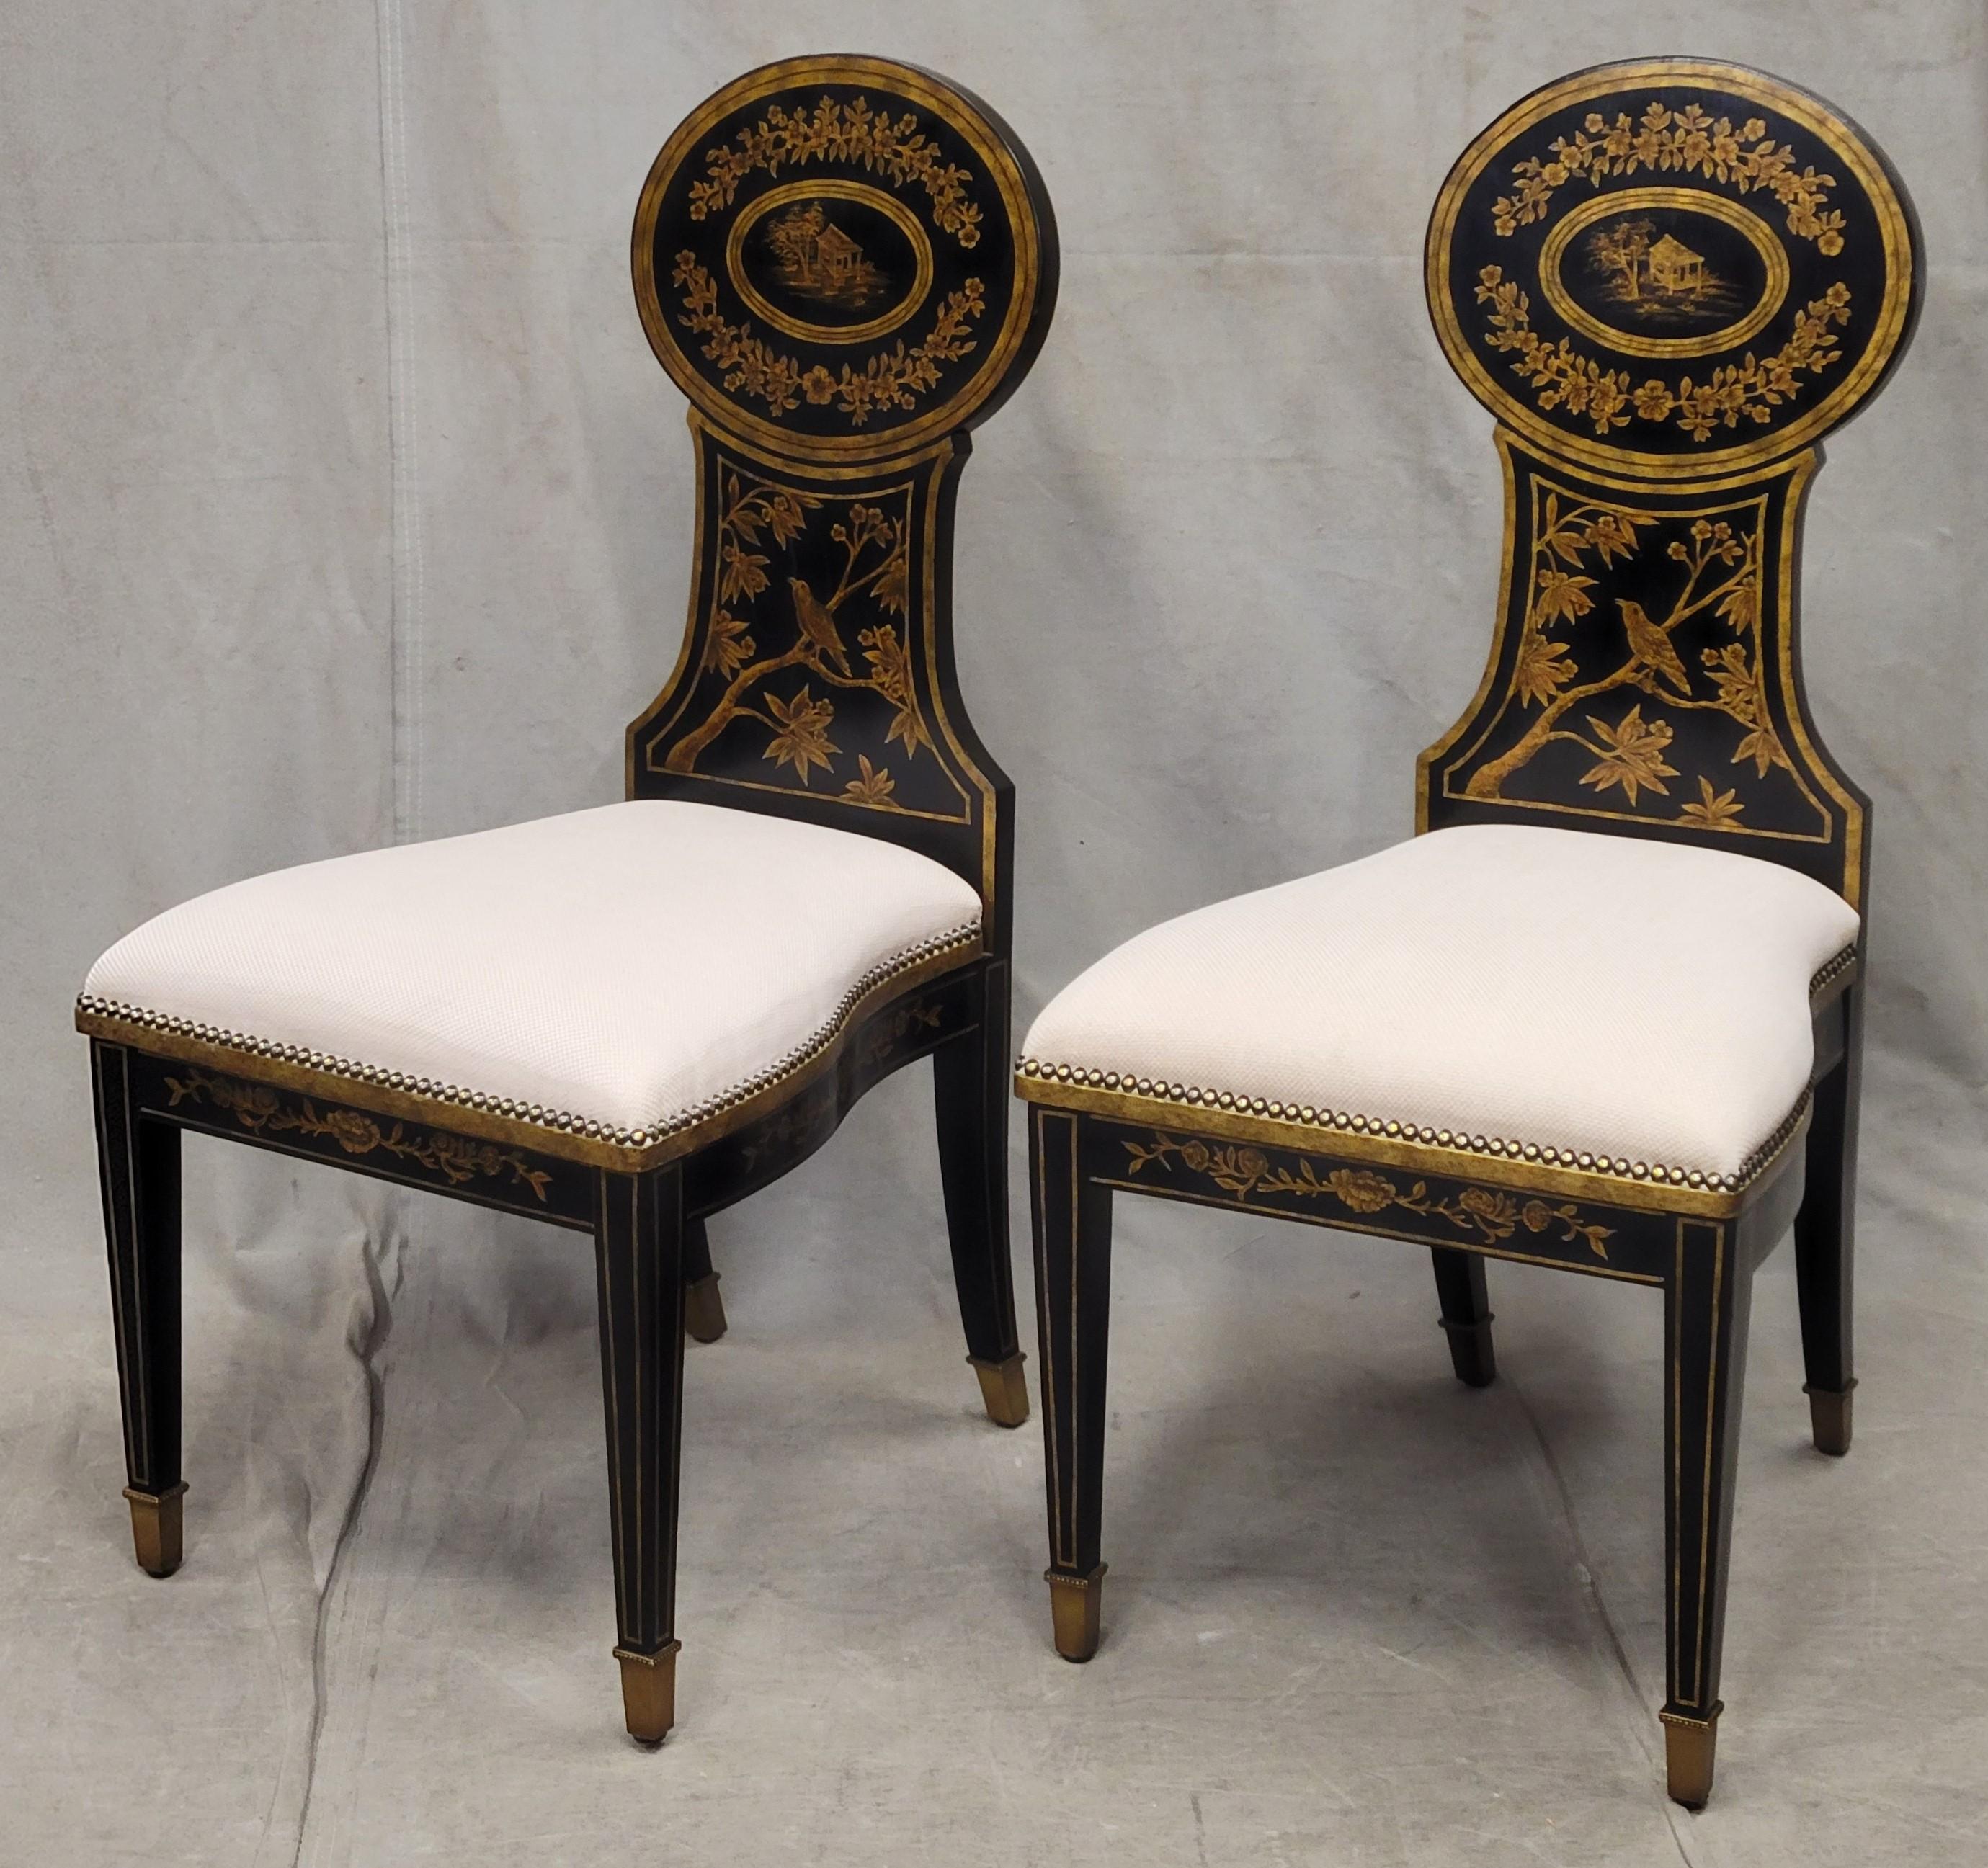 A gorgeous pair of vintage likely 1990s Maitland-Smith chinoiserie side / accent chairs in ebonized wood with gold painted accents of flowers, birds and Asian Style houses. The polished brass tacks and brass feet are shiny and gorgeous. The woven